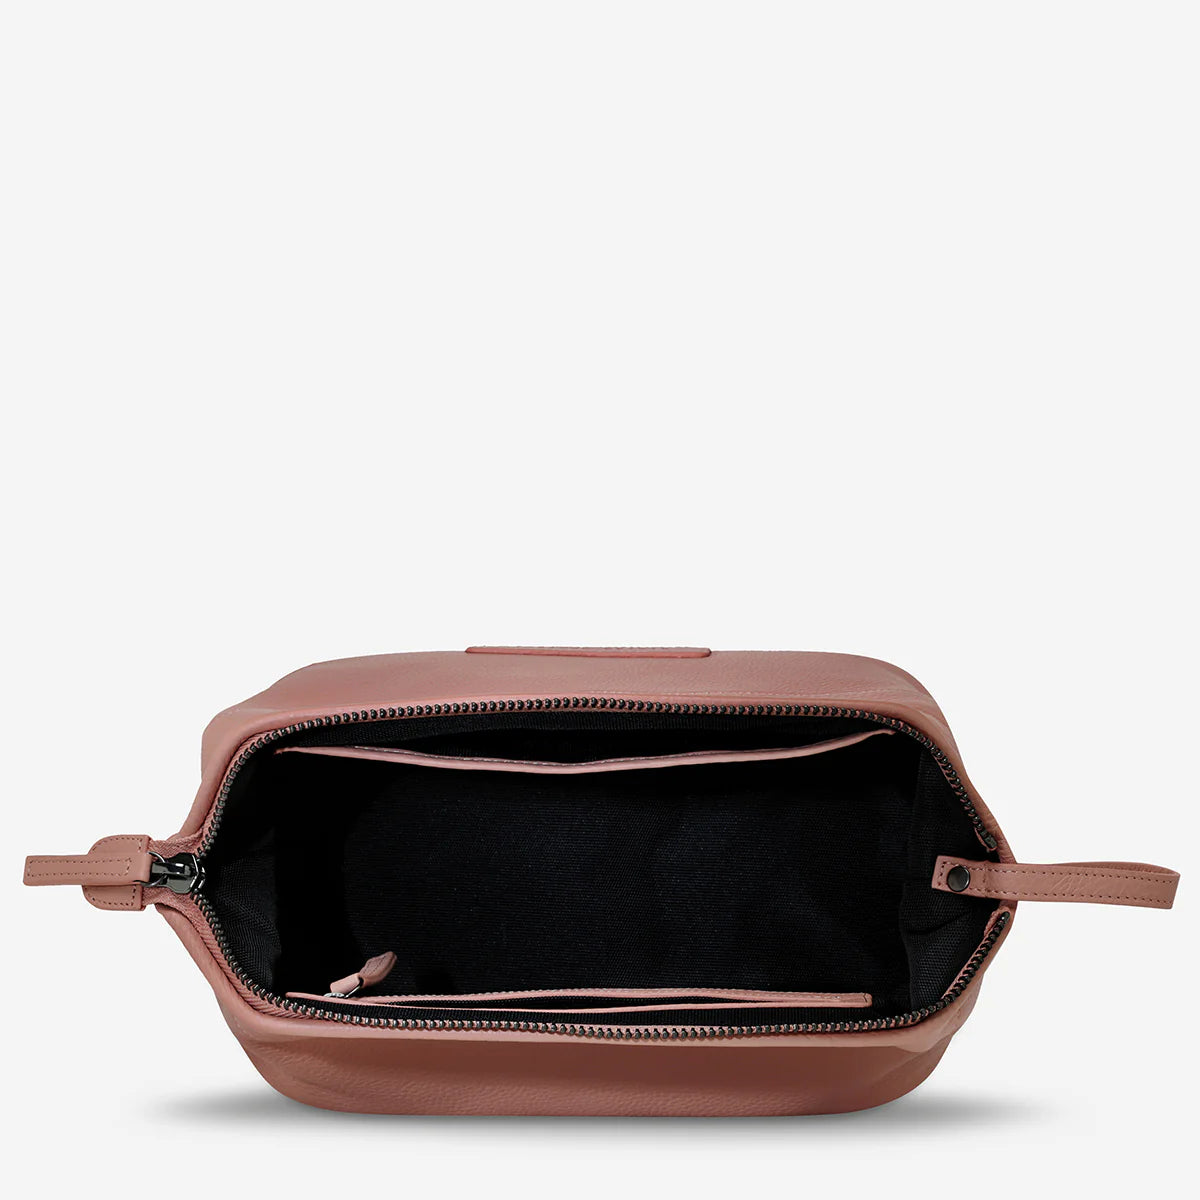 STATUS ANXIETY - Liability Leather Toiletries Bag - DUSTY ROSE